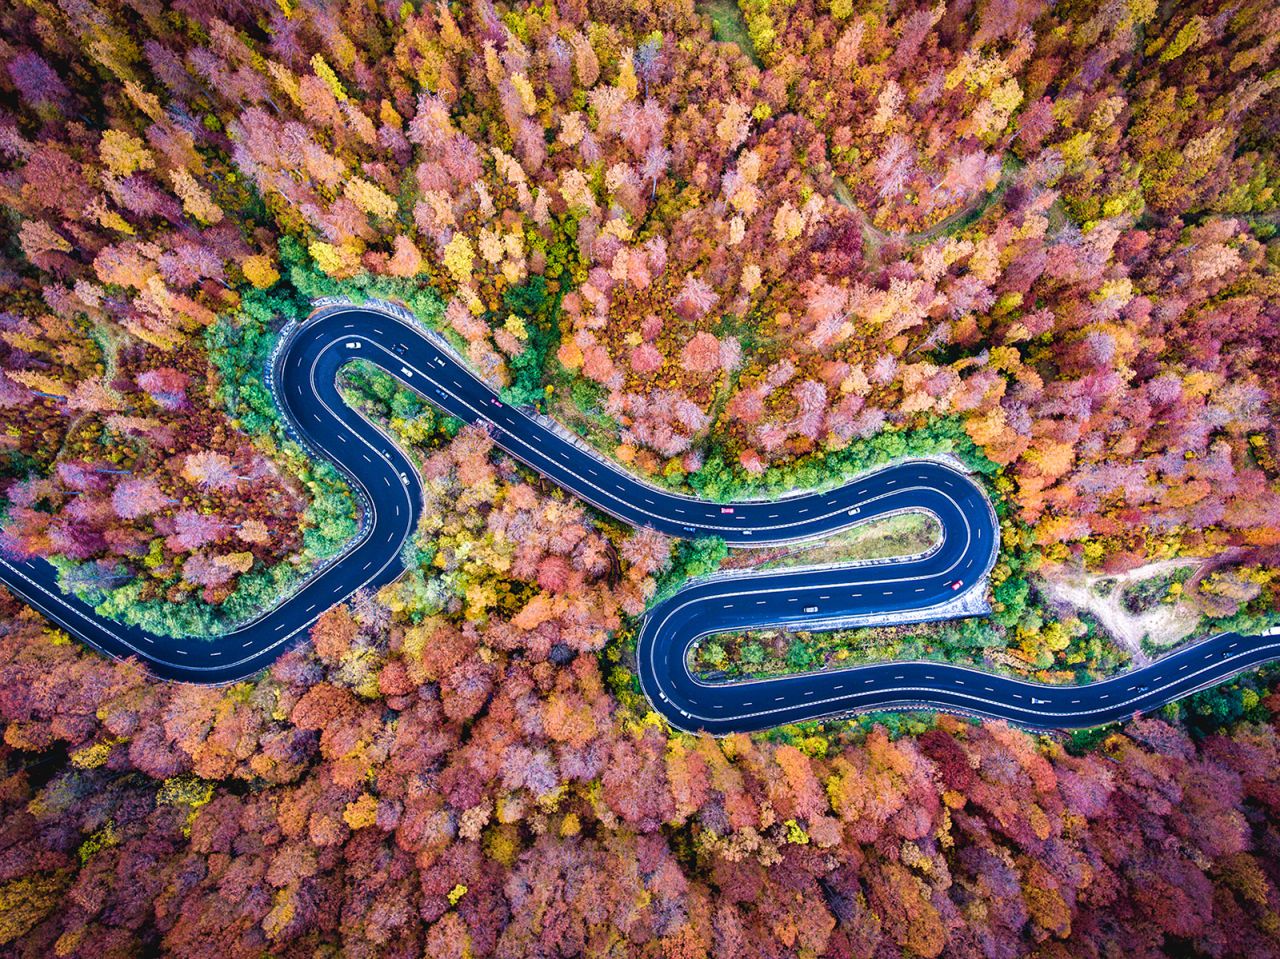 <strong>Coolest drone photos of 2016: </strong>The team behind Dronestagram, an image sharing website for drone photographers, handpicked 20 best shots taken and submitted by its users last year. Here's a stunning picture of Bogata Forest, Romania, taken by Bucharest-based dronist Calin Stan.